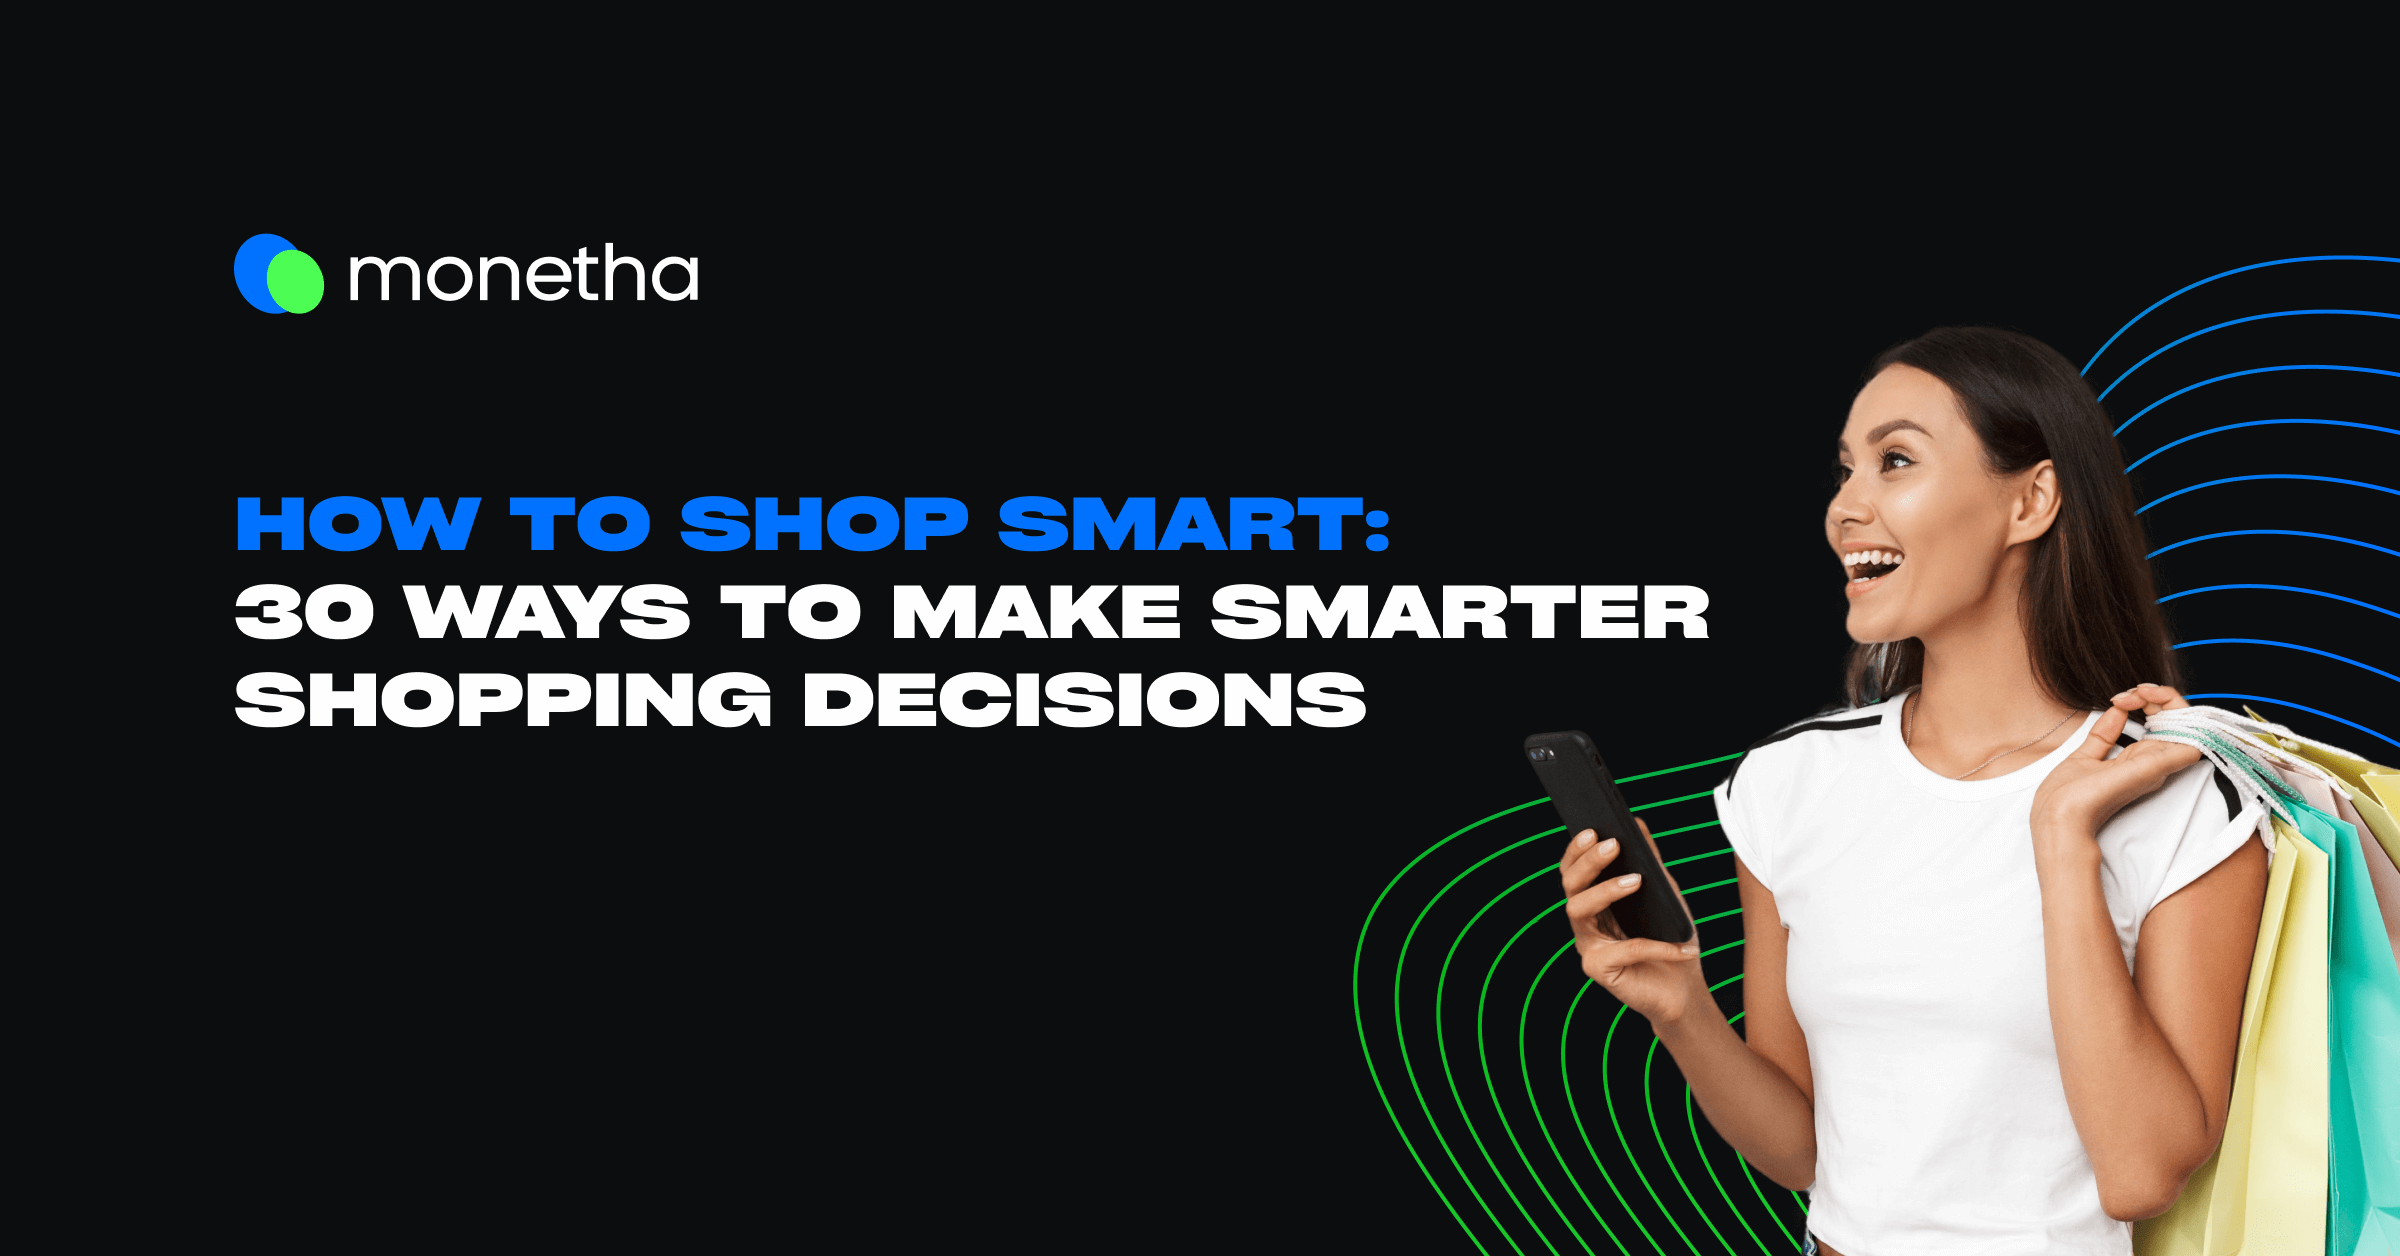 how to shop smart image 1